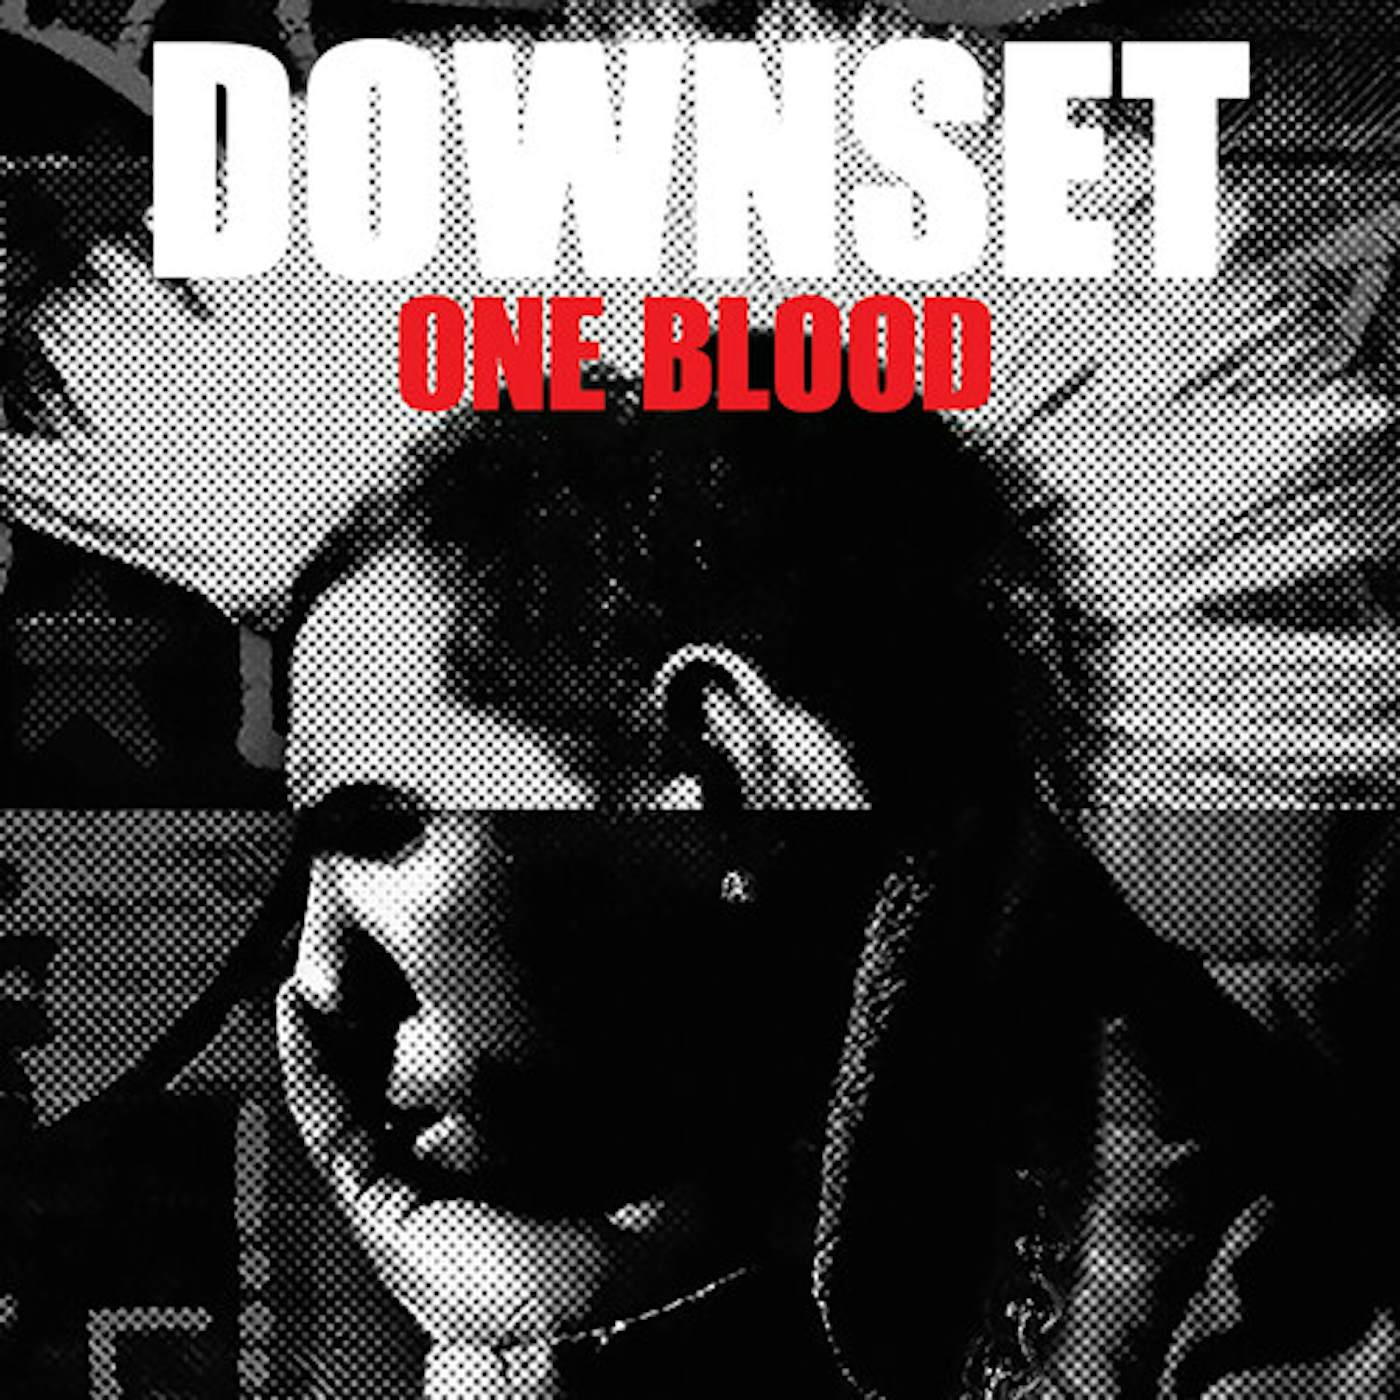 Downset ONE BLOOD CD